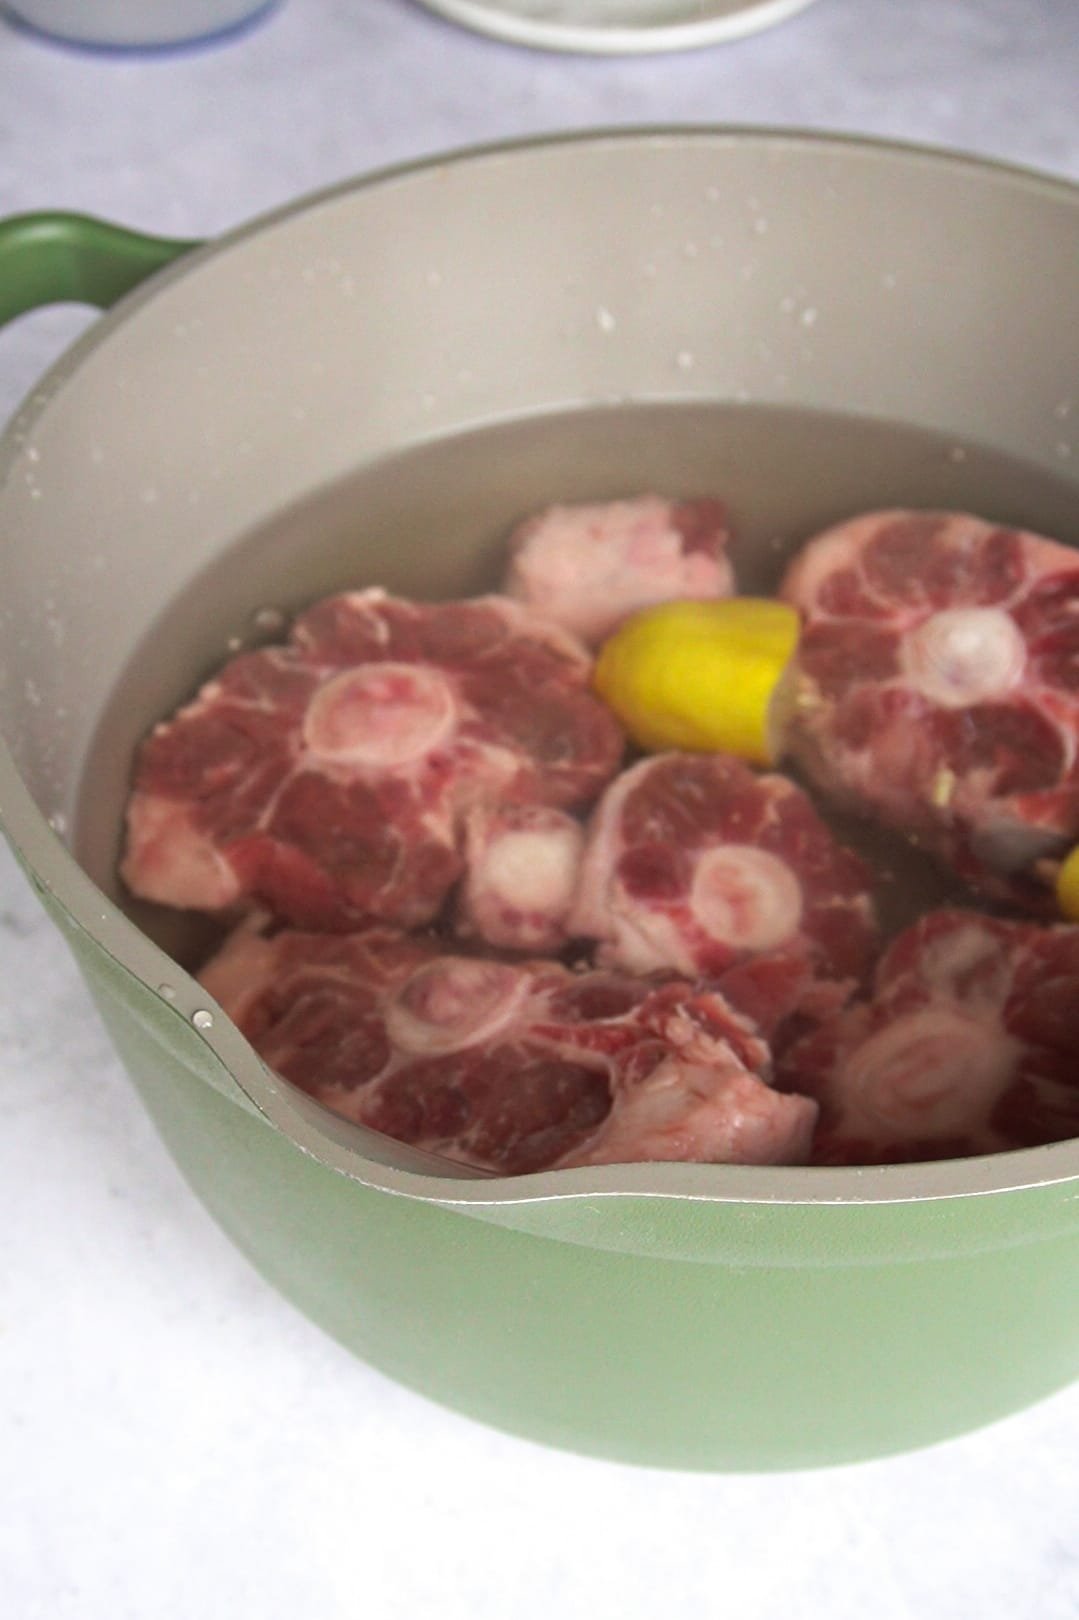 Salt your meat generously for your Simple Homemade Oxtail Soup and add lemons to cleanse it well. 